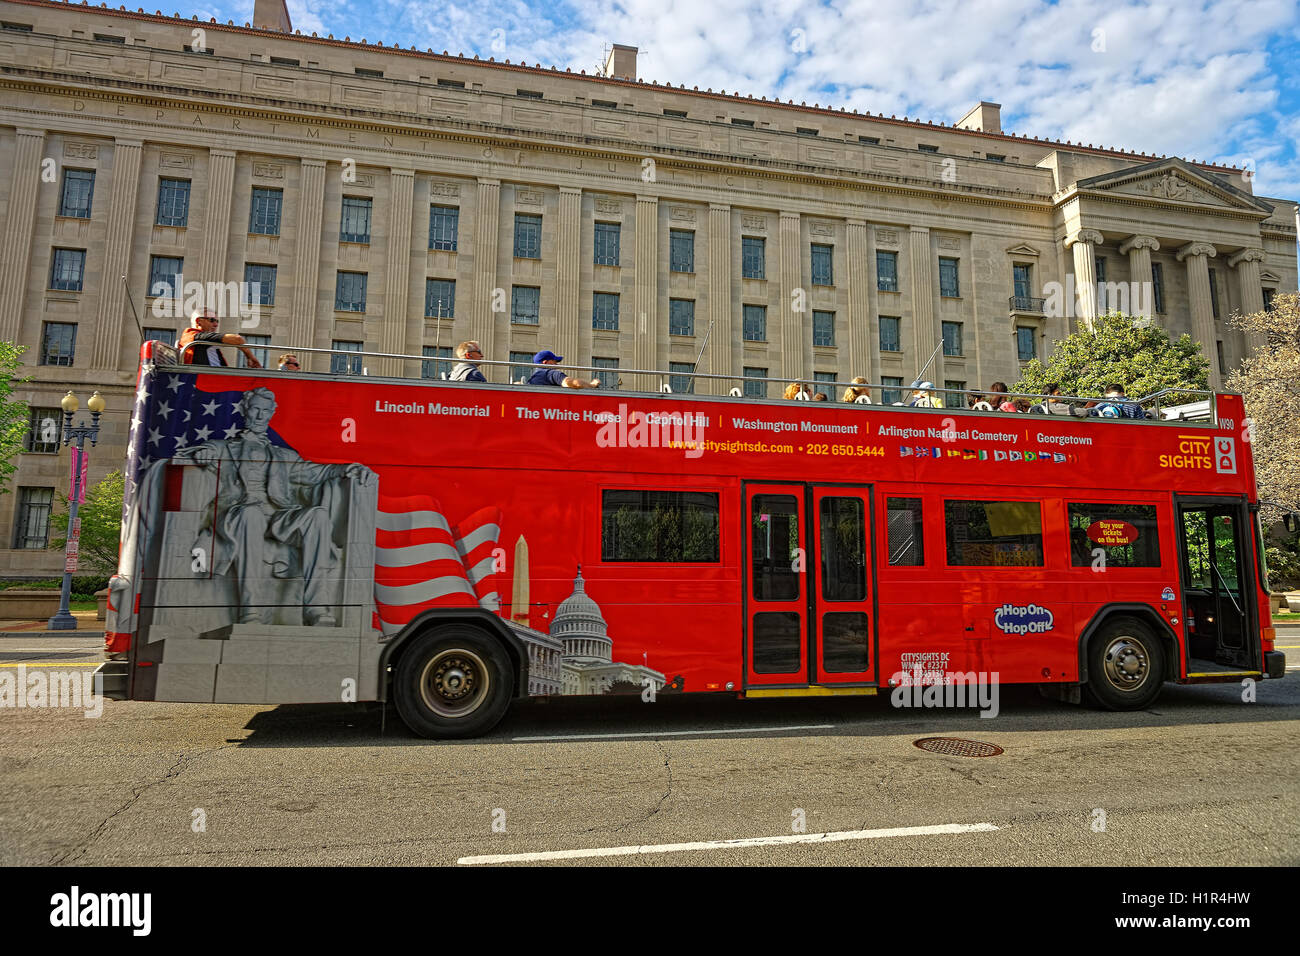 Washington D.C., USA - May 2, 2015: Tourist bus with people was seen near the Department of Commerce in Washington D.C. It is located in Herbert C. Hoover Building. It was built in 1932. Stock Photo